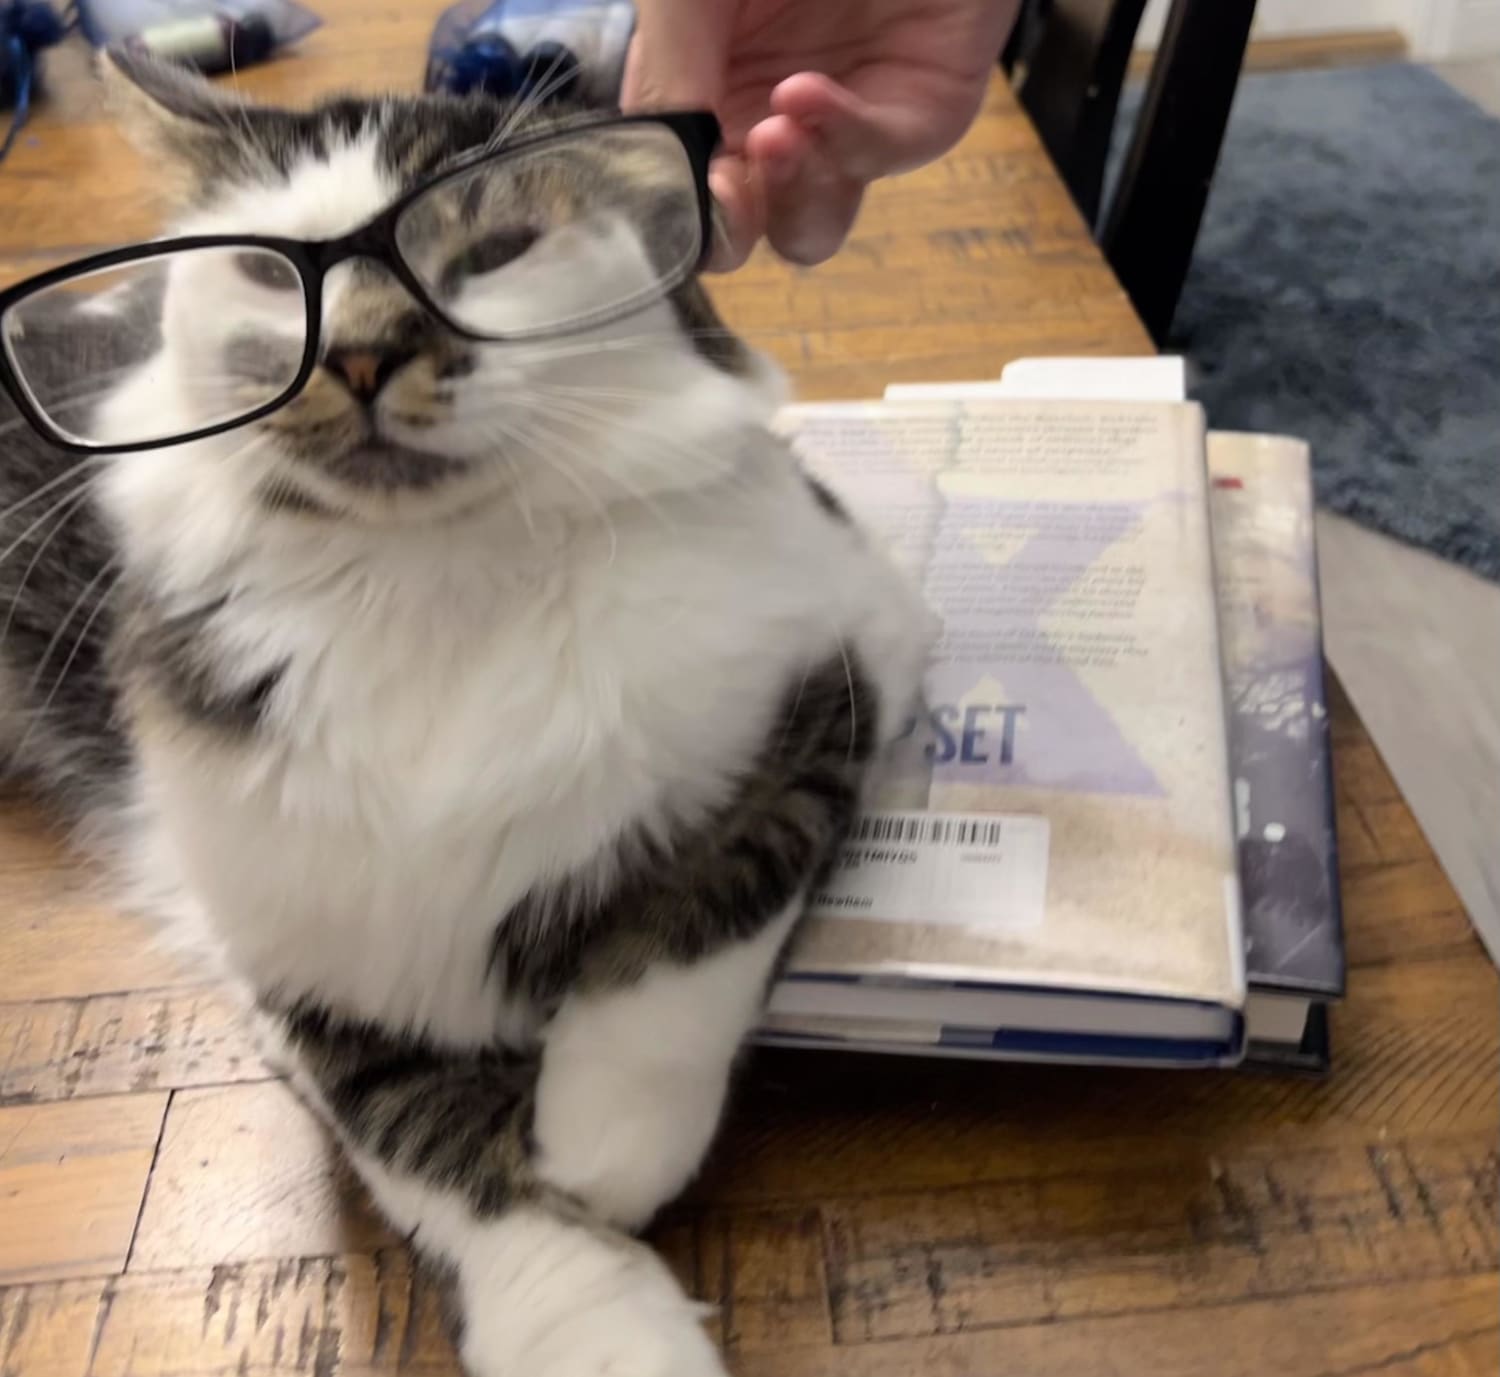 Librarian cat can not check out these books to you until you have paid your past due fine of $1.40